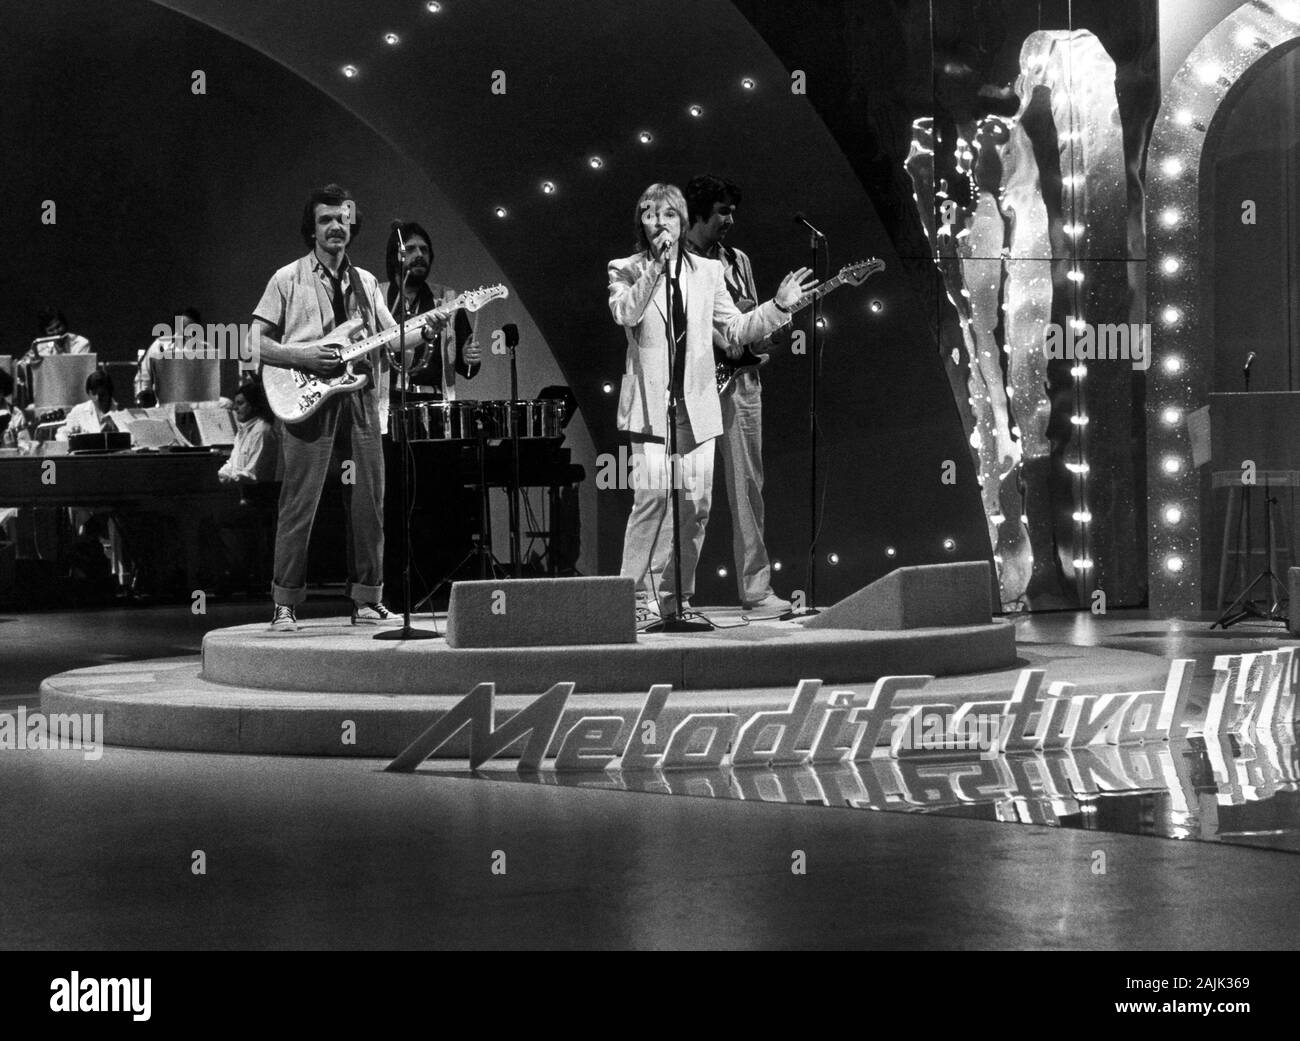 Ola Håkansson with his band Secret Service at Swedish sellection for Eurovision song contest Stock Photo